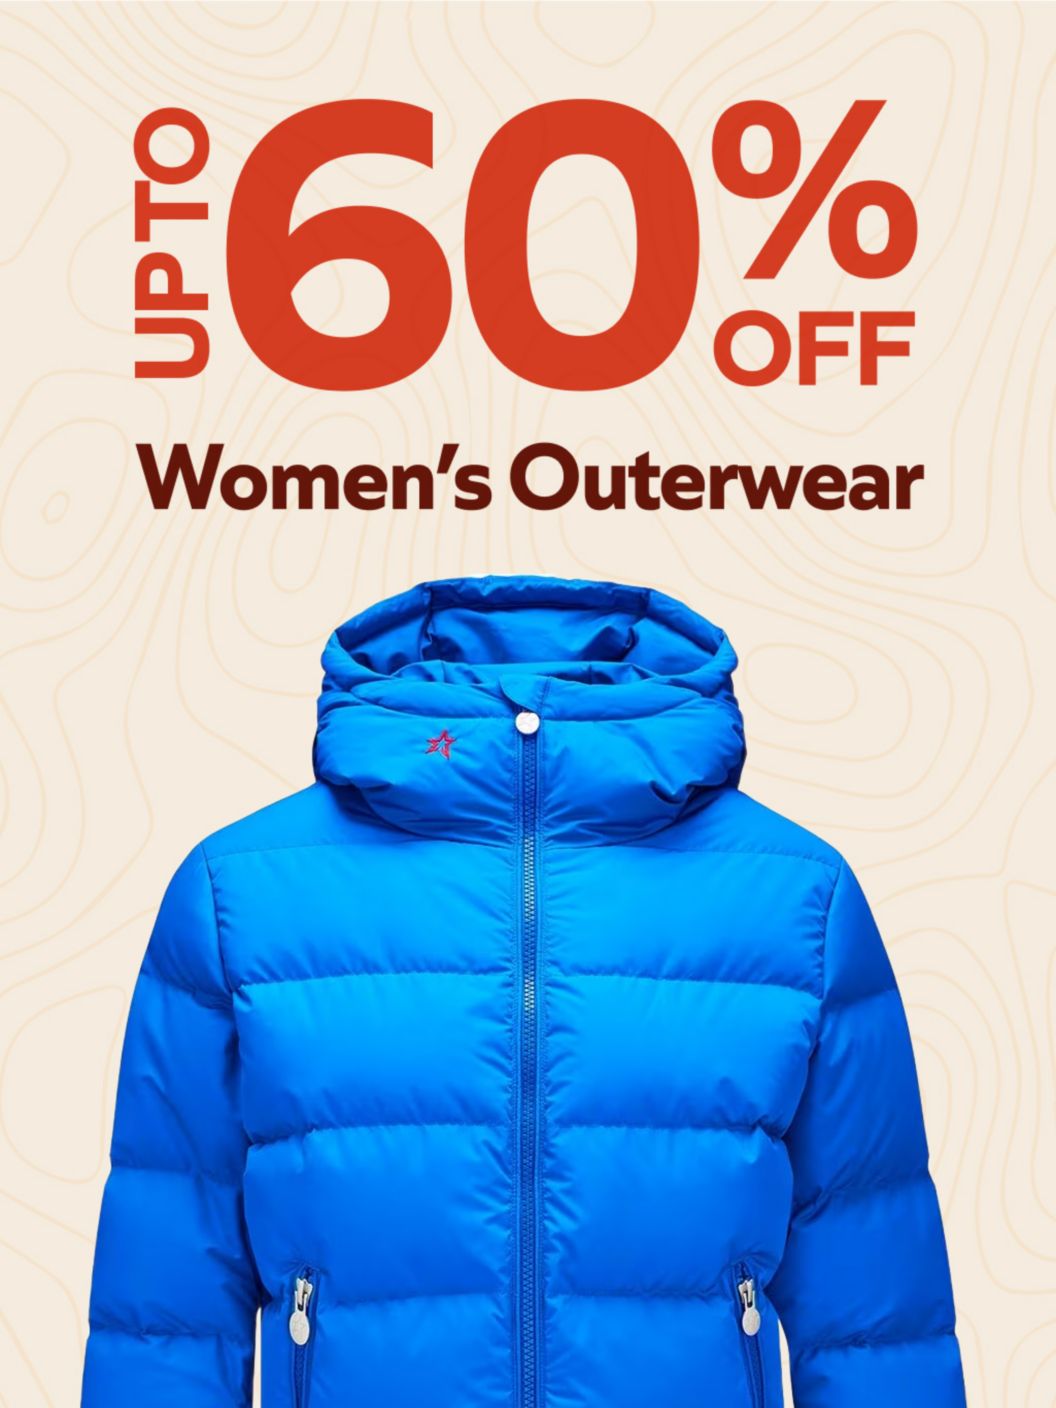 Women’s outerwear up to 60% off. 